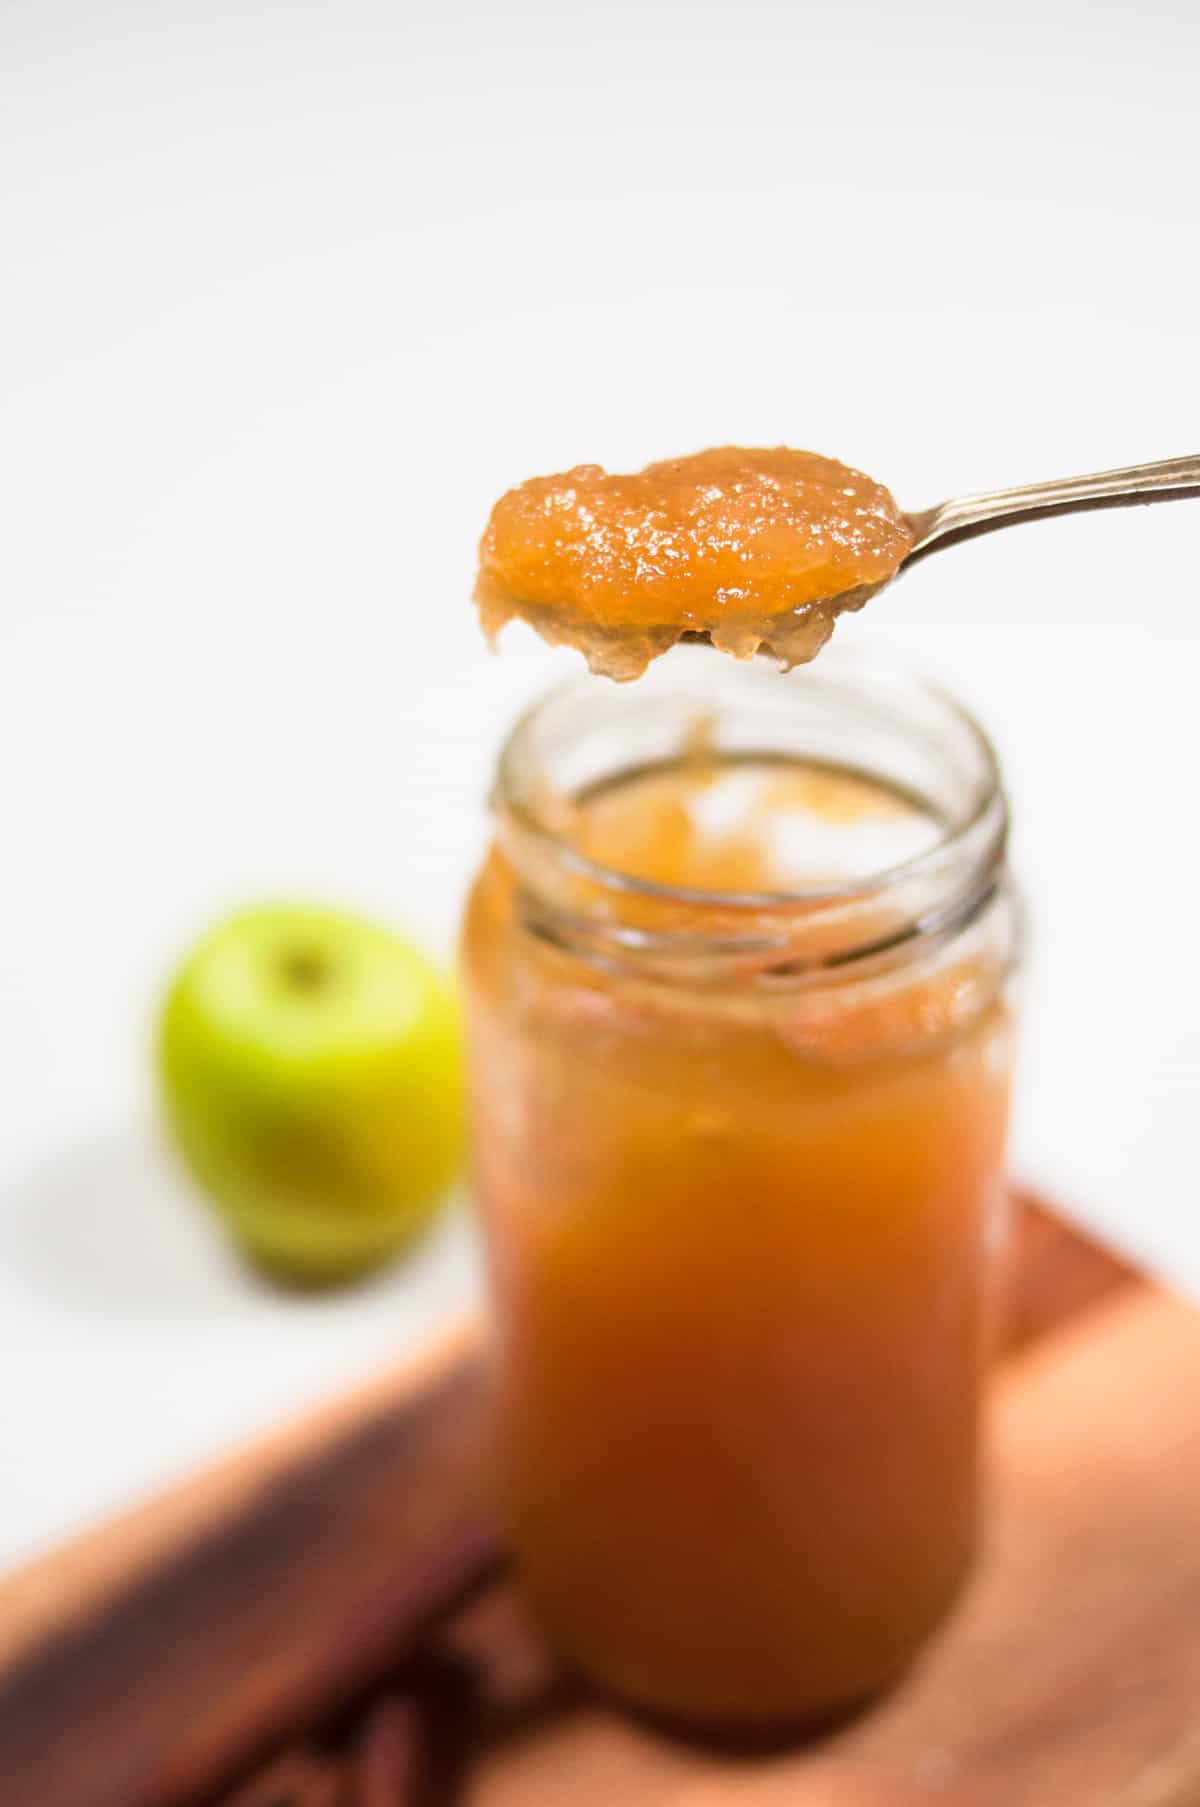 A spoon full of jam over the jar with green apple in the background.